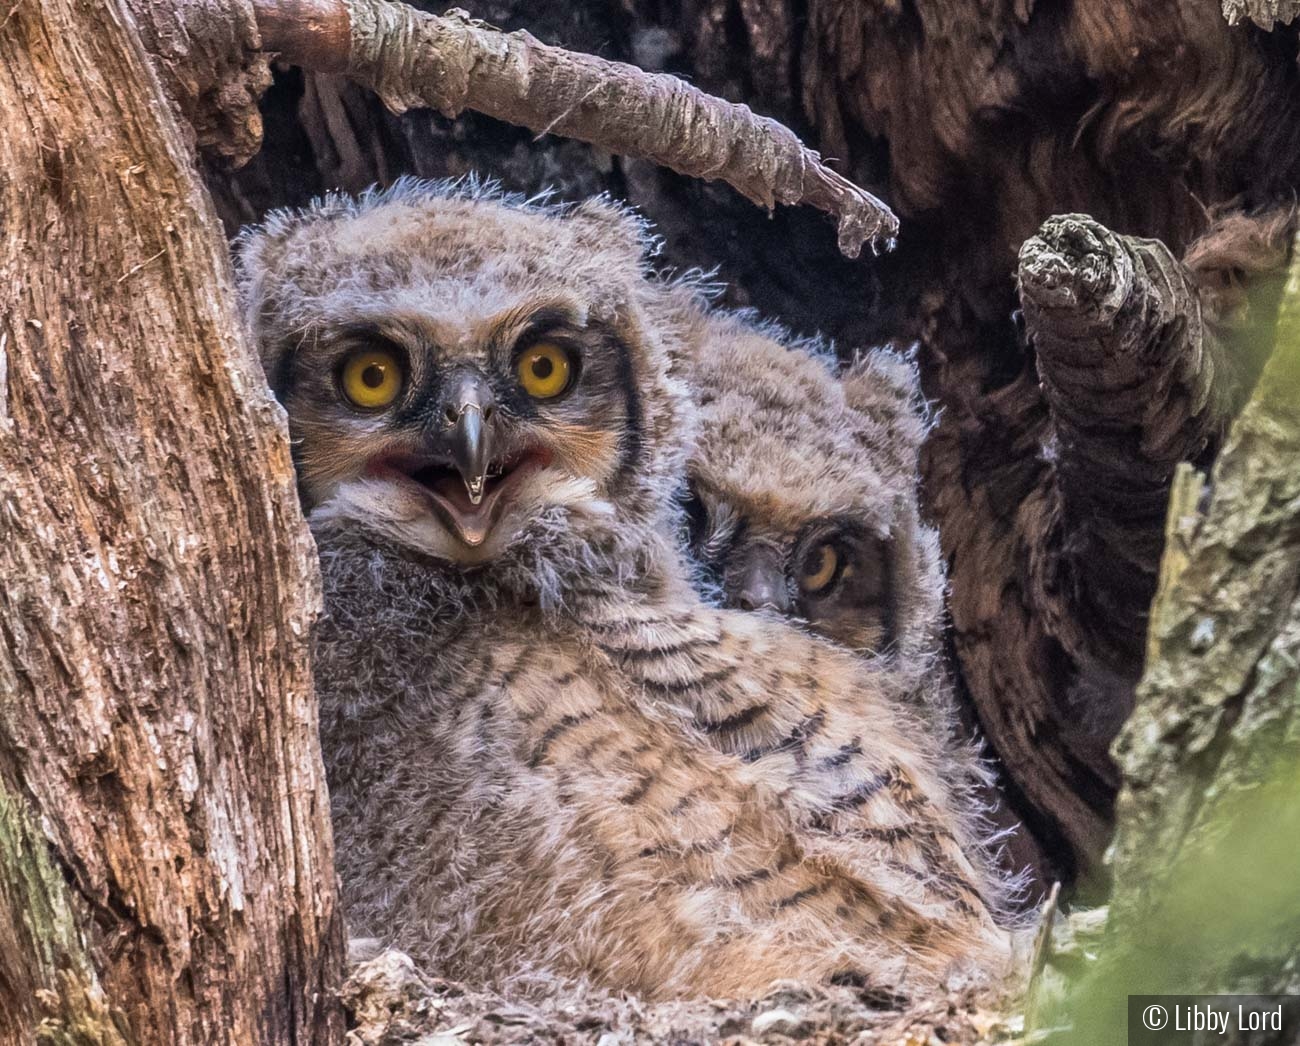 Baby Owls Peeking from the Nest by Libby Lord